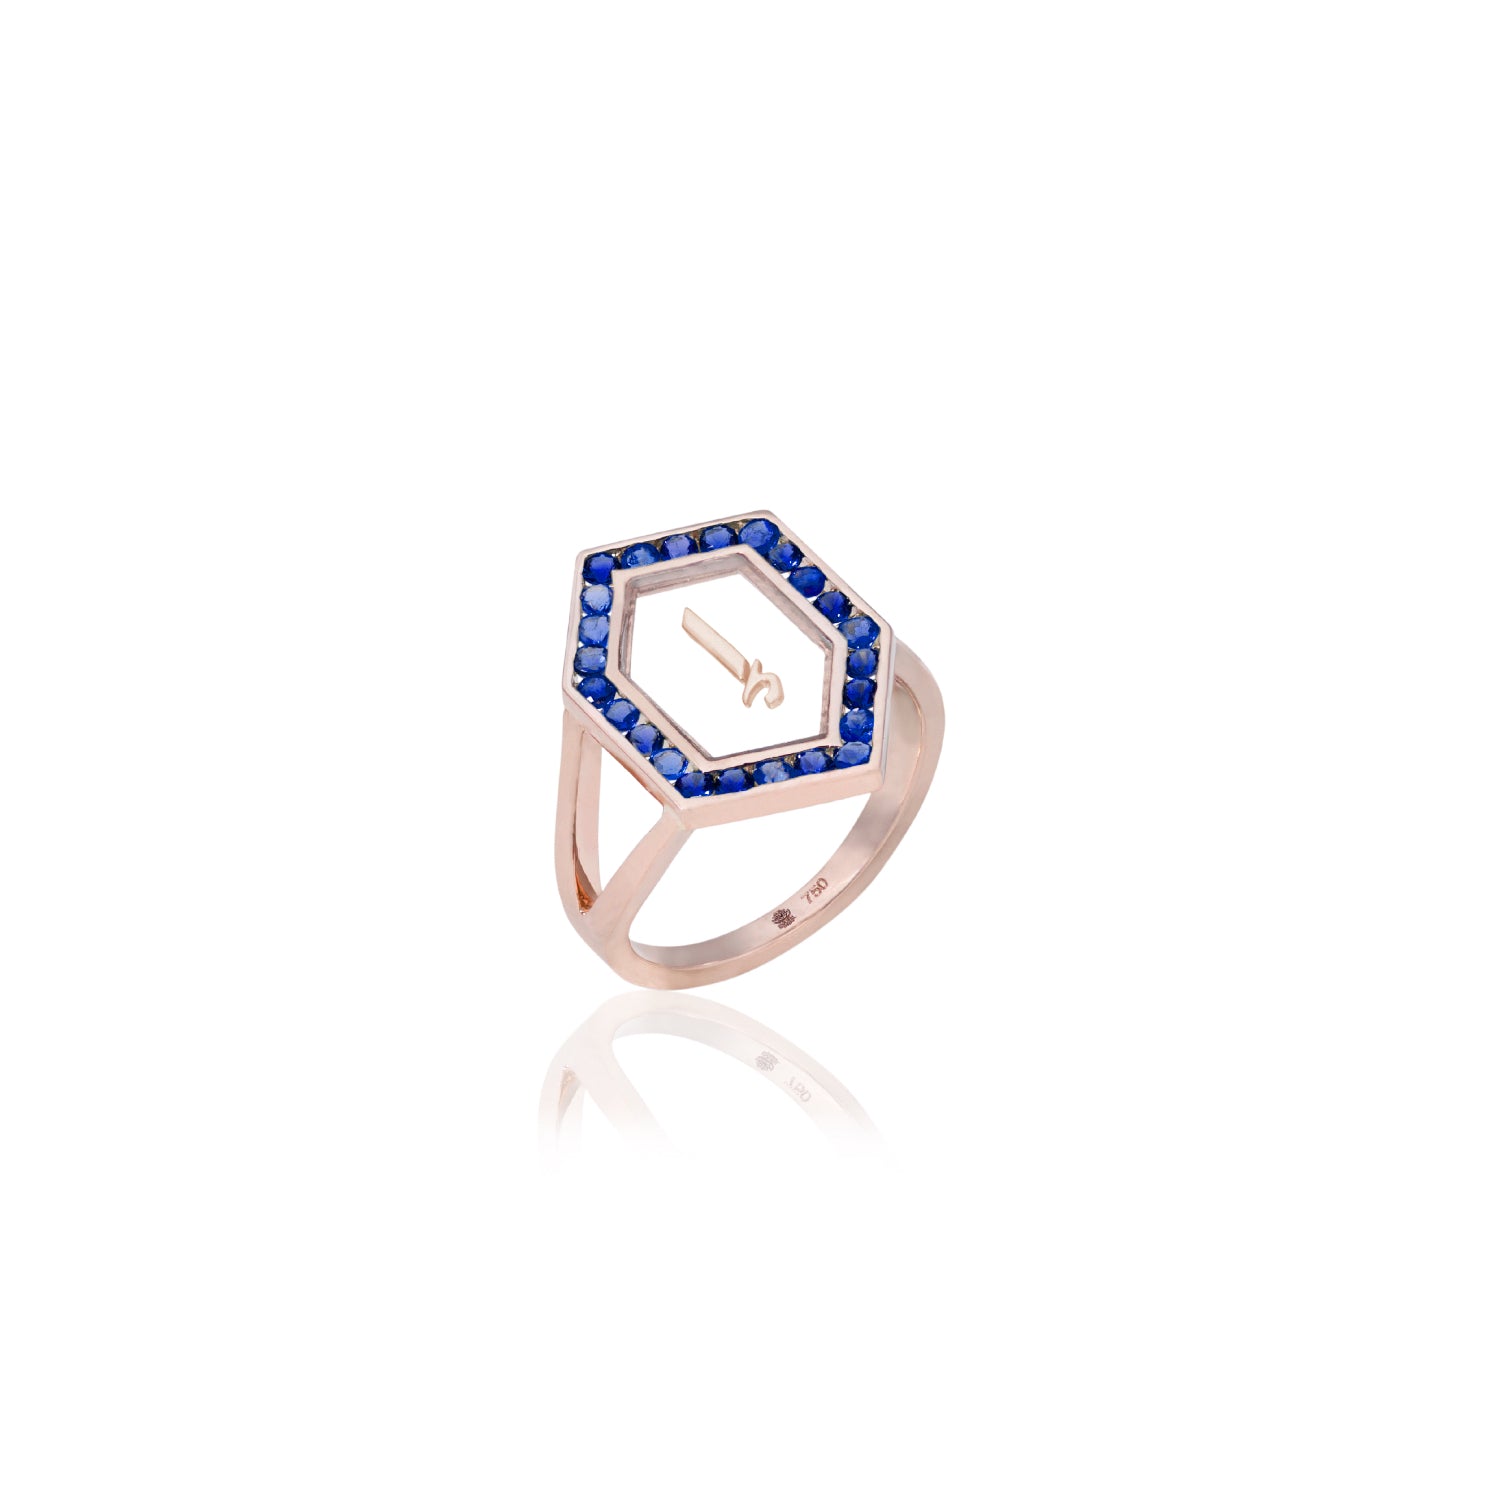 Qamoos 1.0 Letter إ Sapphire Ring in Rose Gold